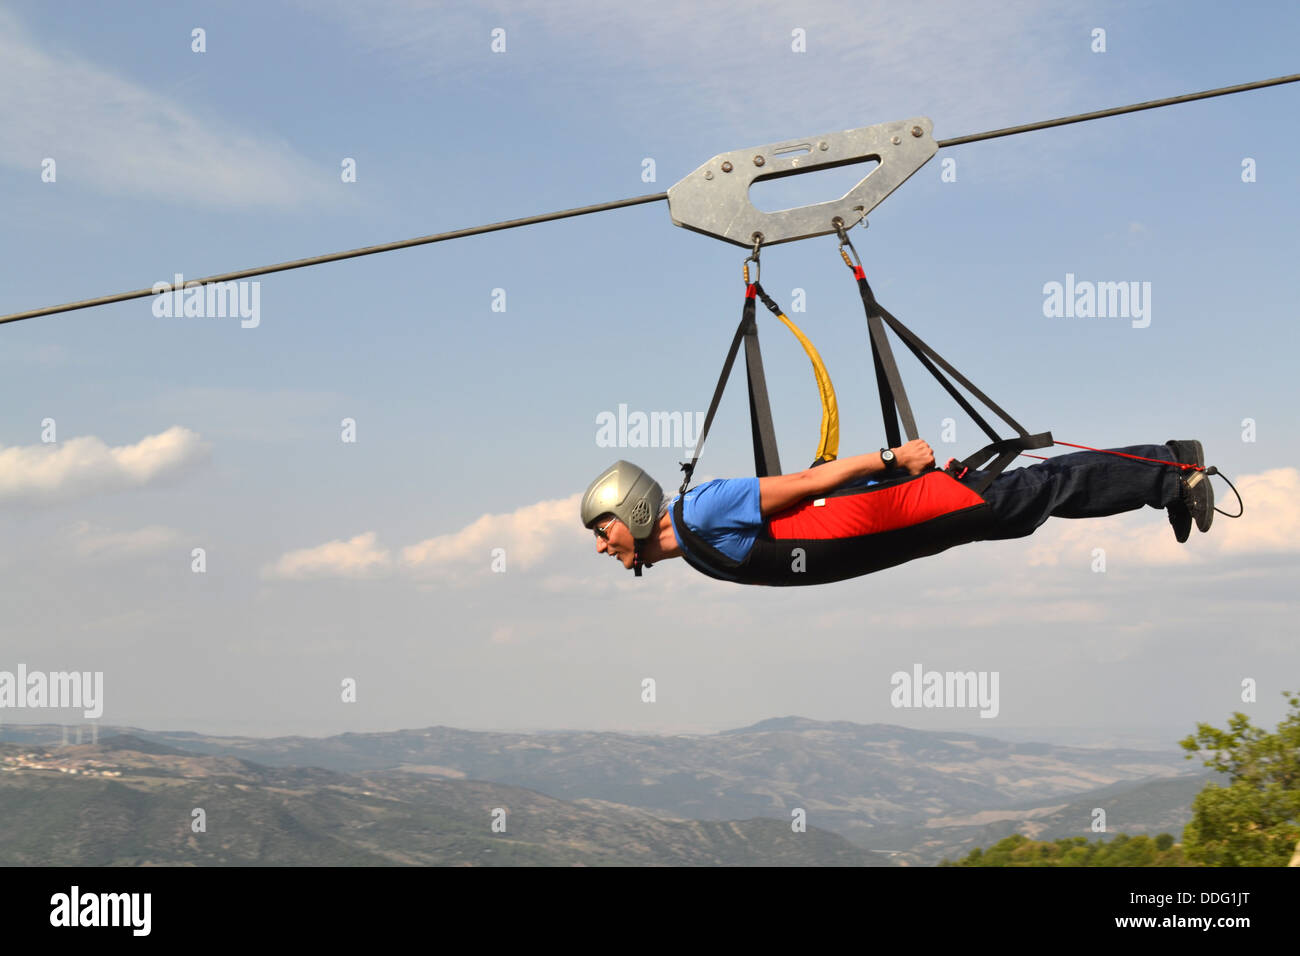 Man on zip wire between two mountains. The Volo dell'Angelo / Flight of the Angel. Adventure activity in Basilicata, South Italy Stock Photo